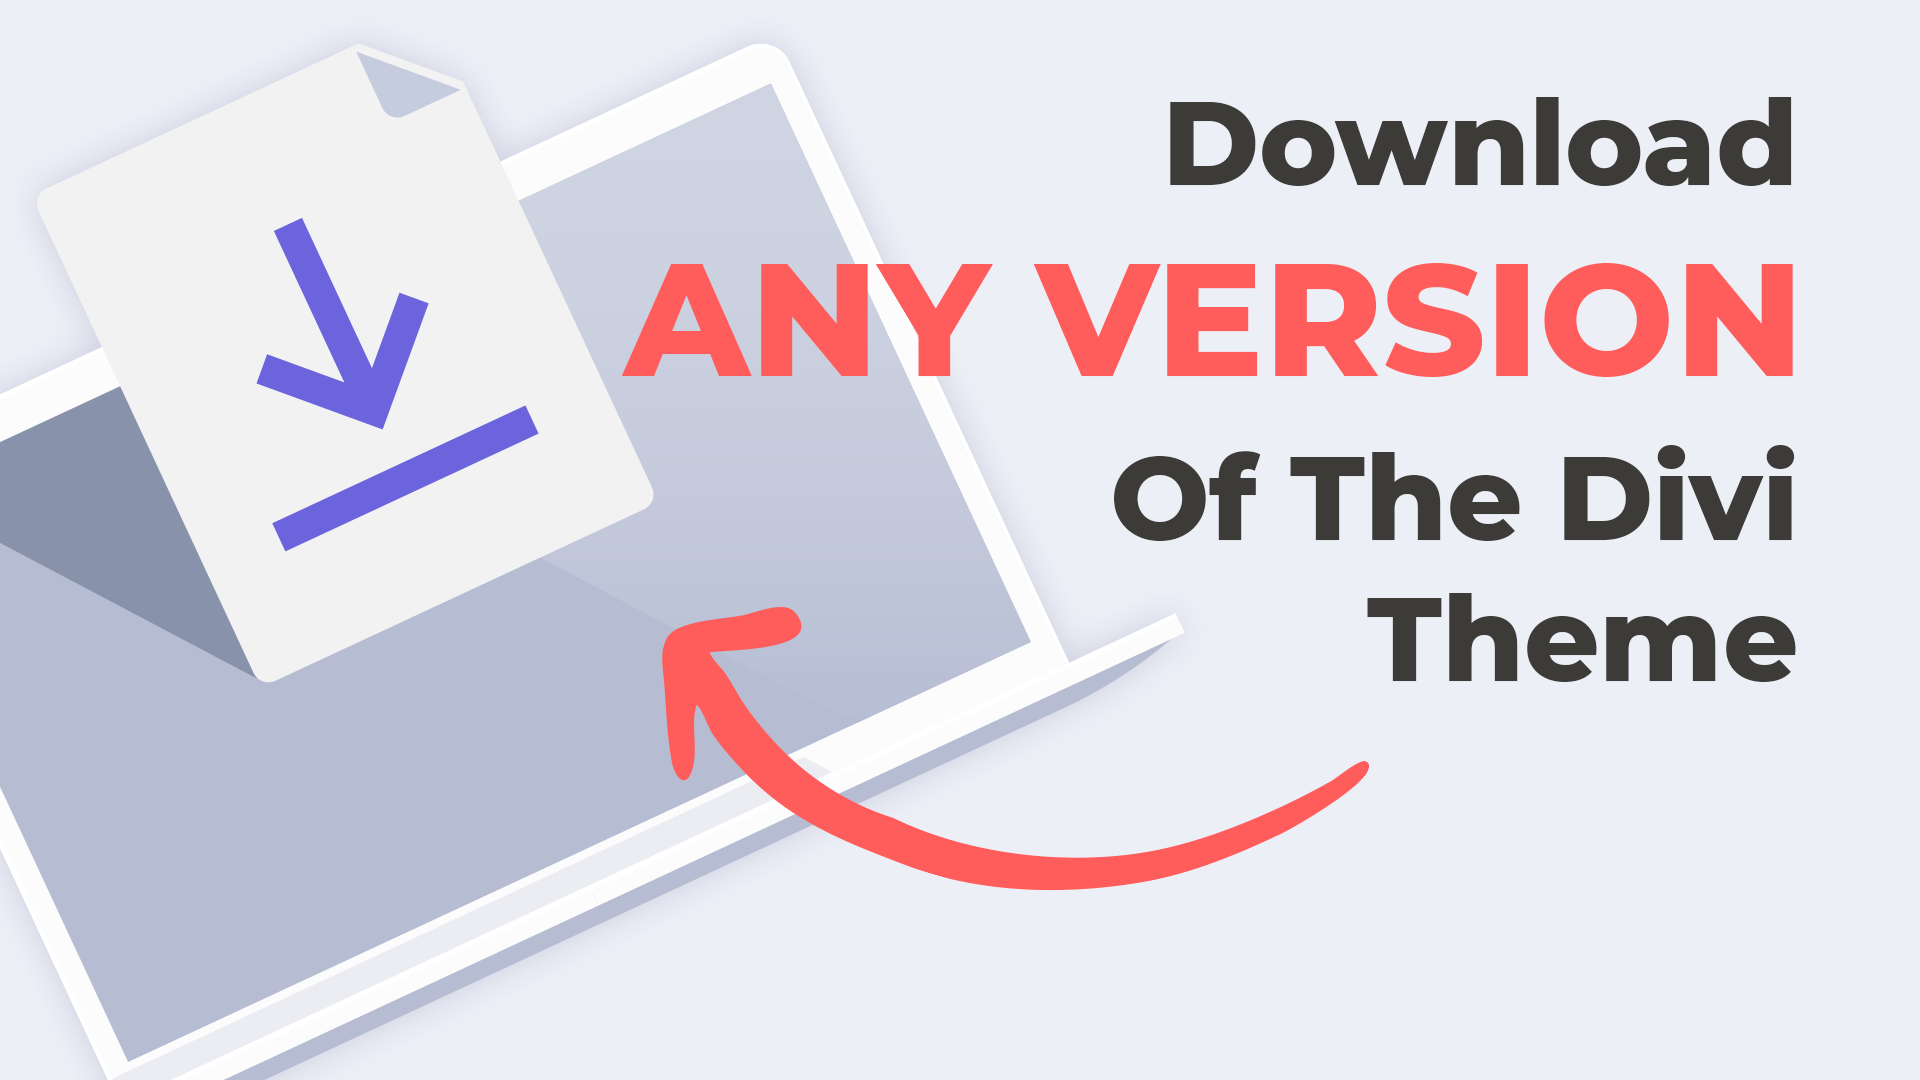 Download Any Version of the Divi Theme